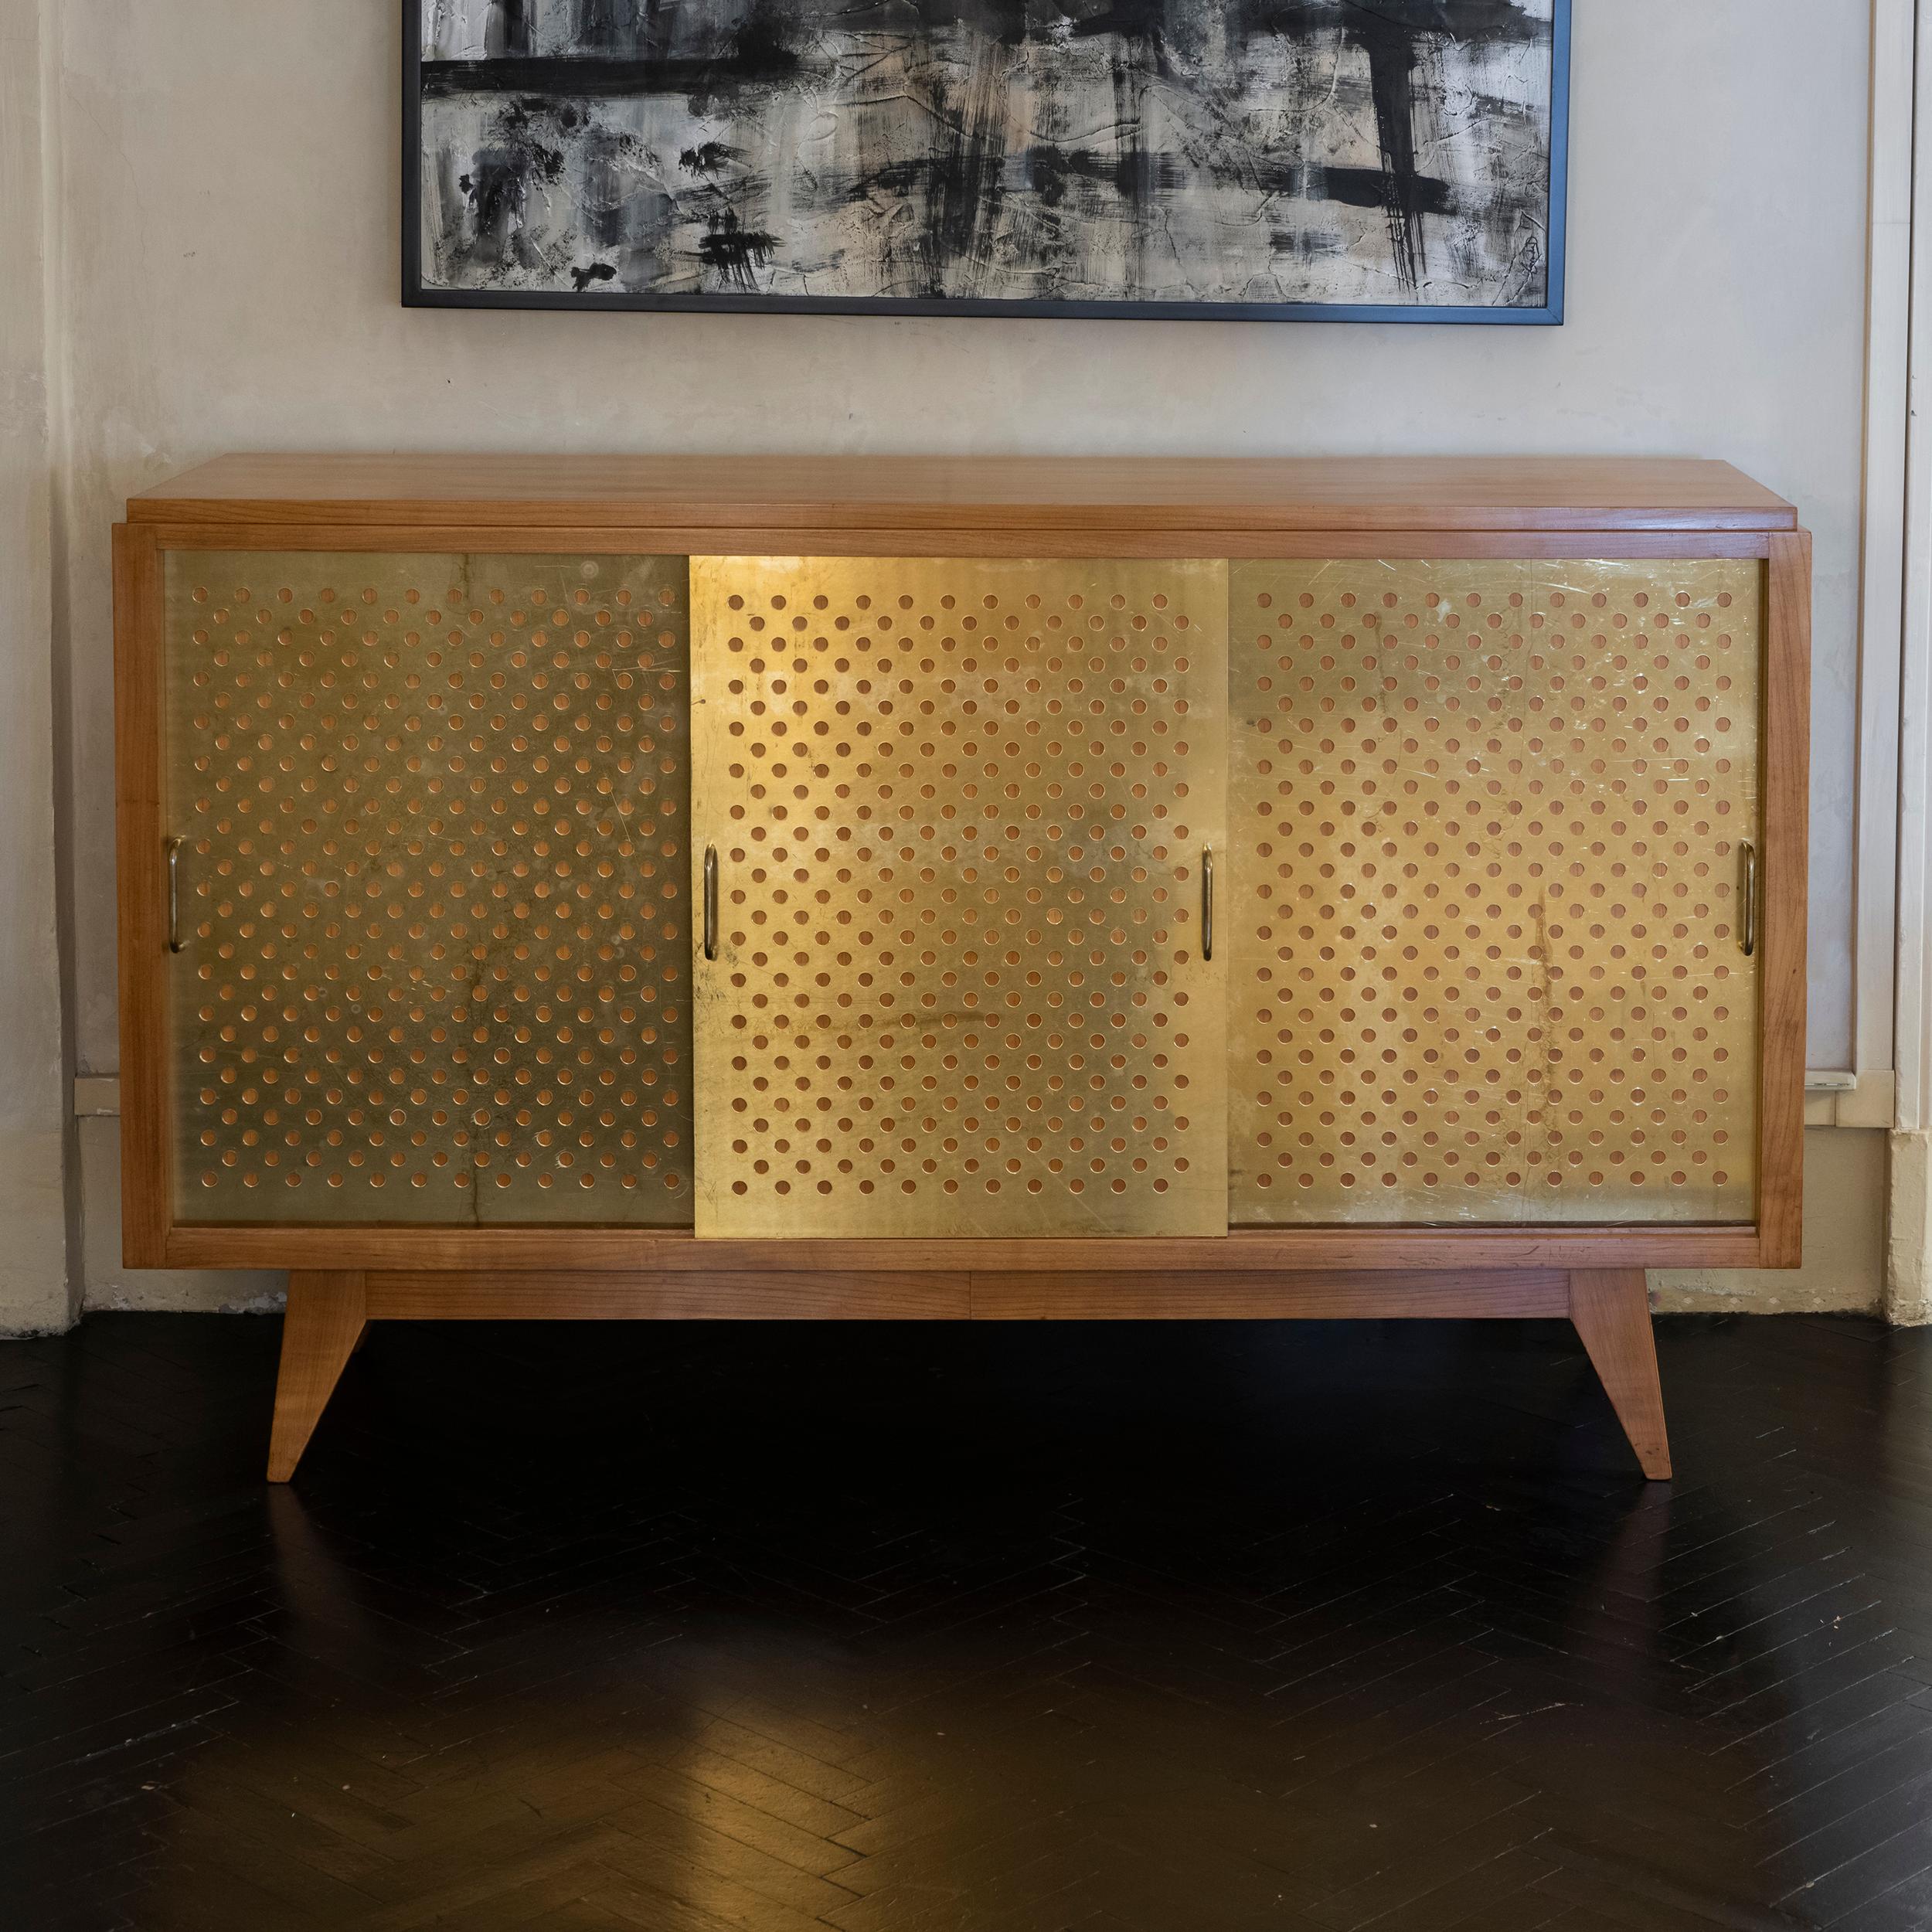 1960's French Oak sideboard, in perfect condition and vintage patina, three sliding doors with decorative panels in perforated brass inspired by the work of Jean Prouvé, two adjustable shelves inside.